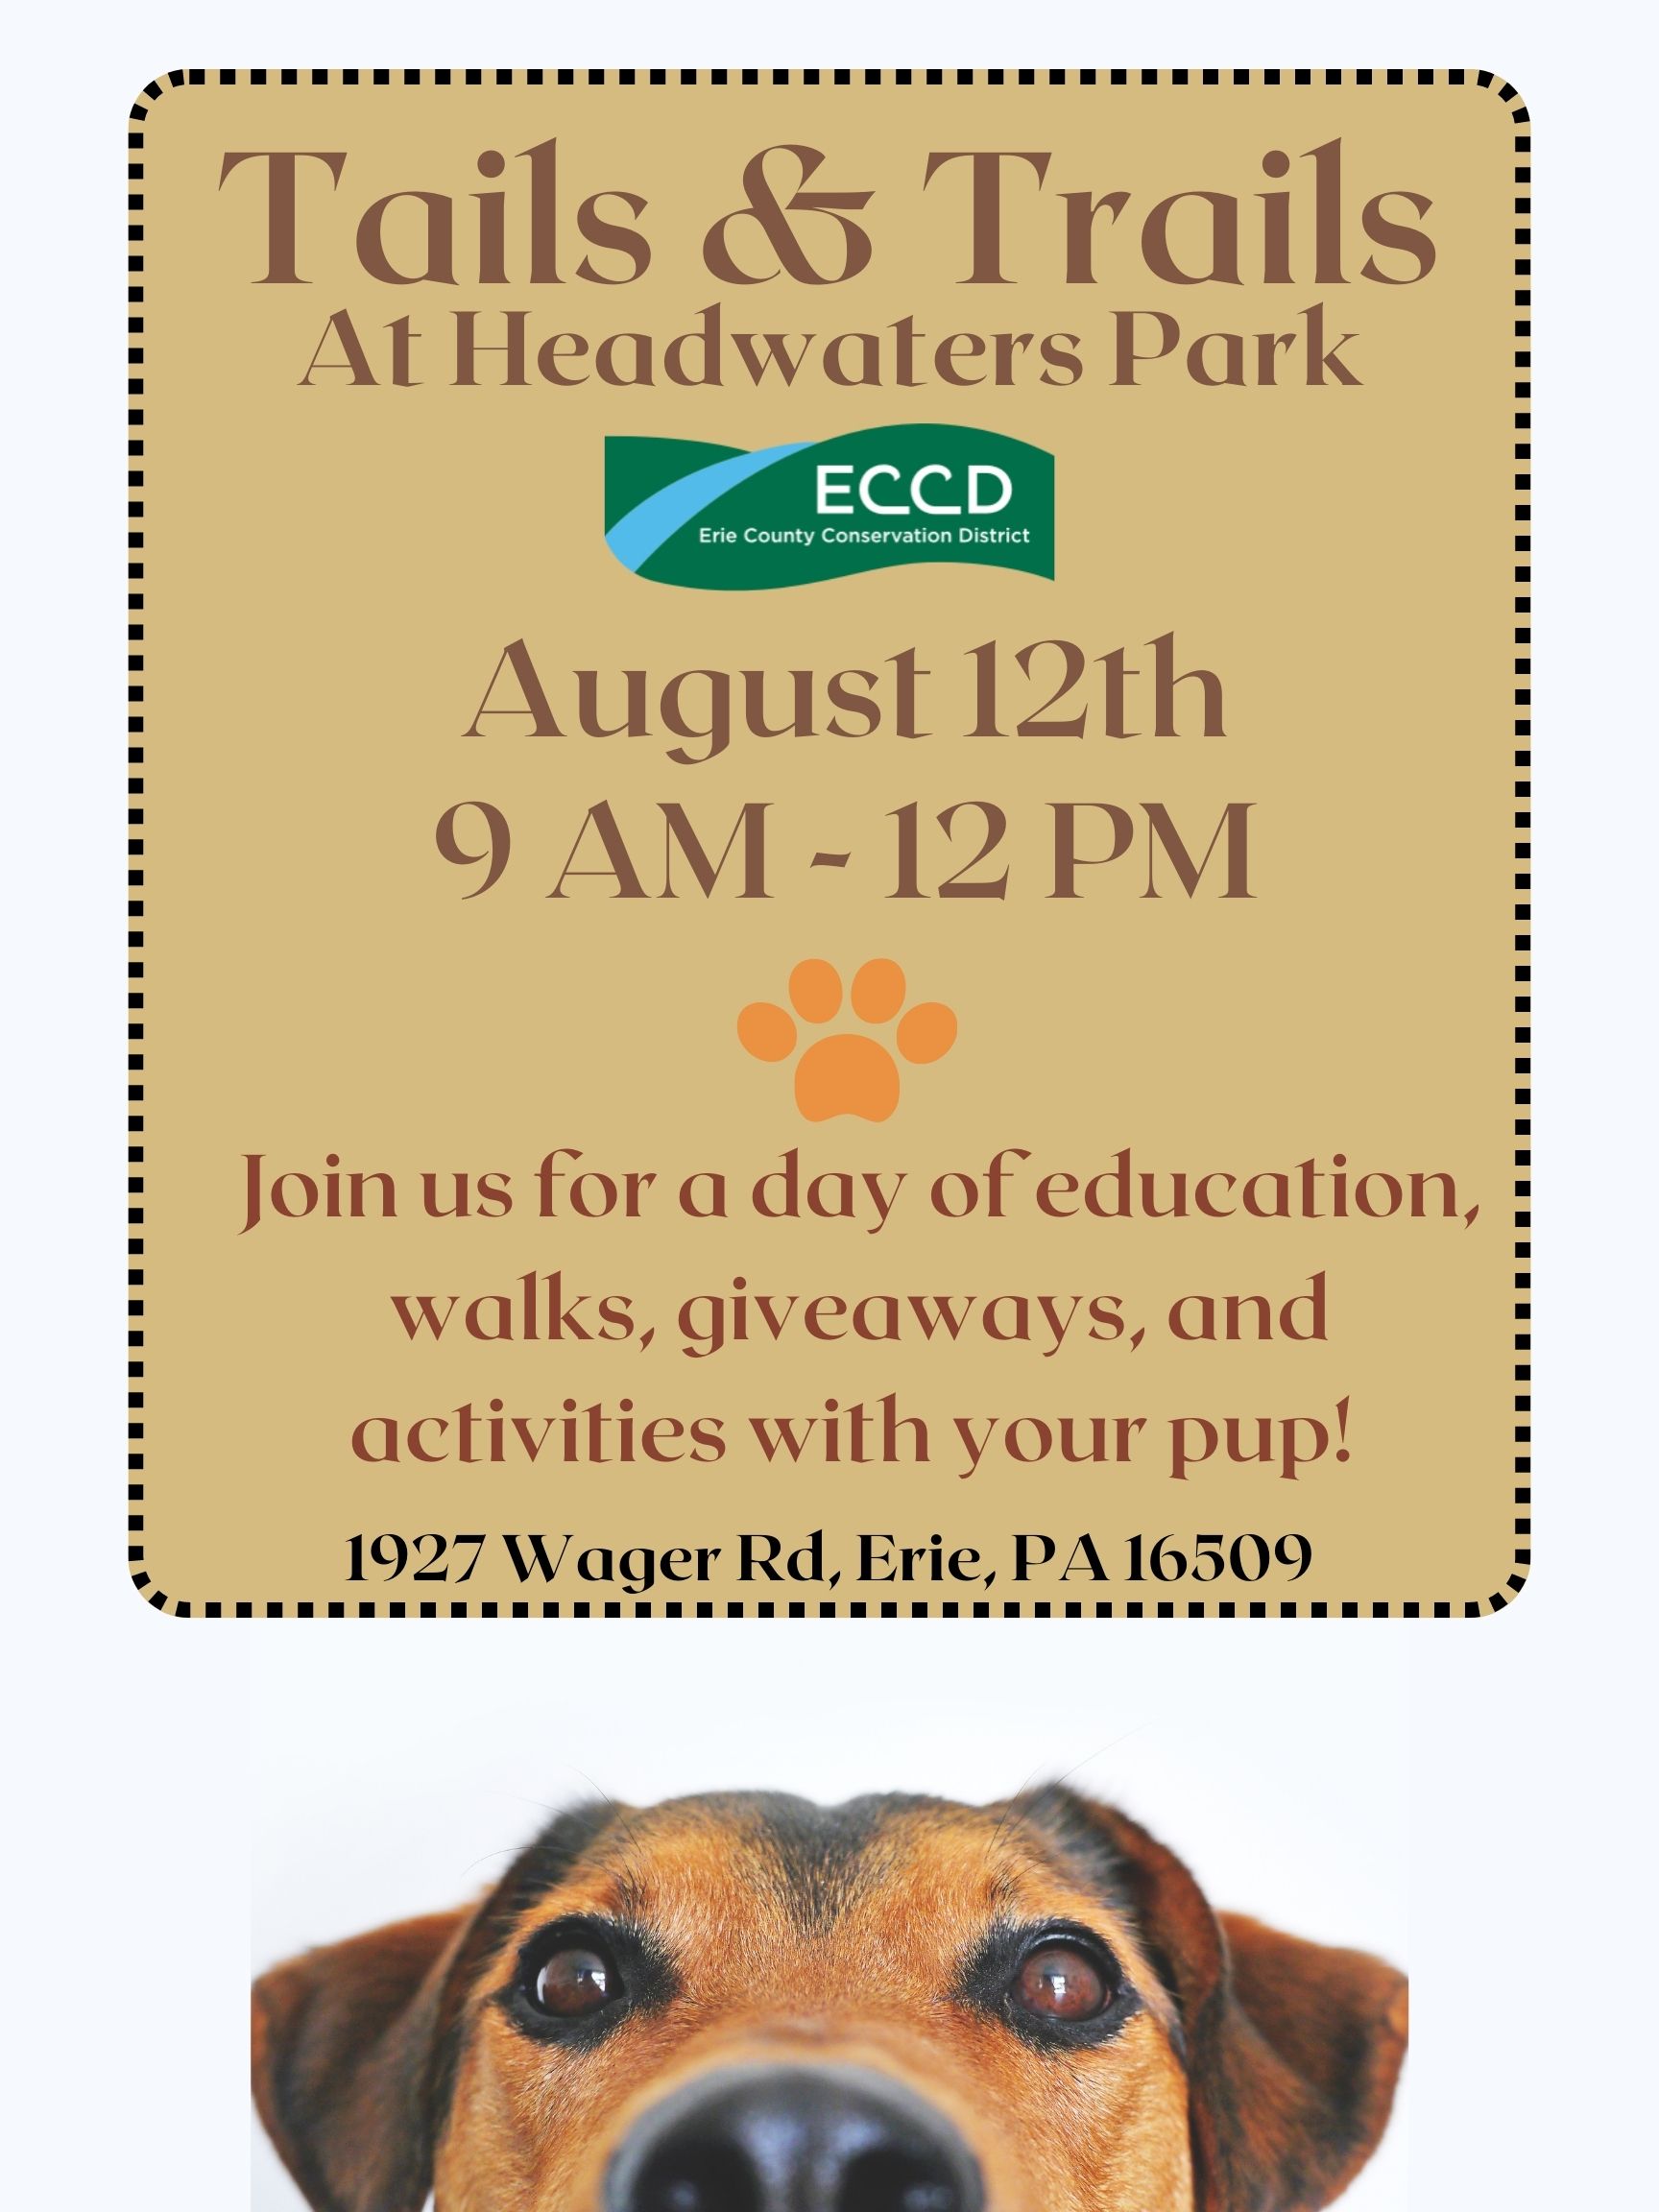 Tails & Trails at Headwaters Park